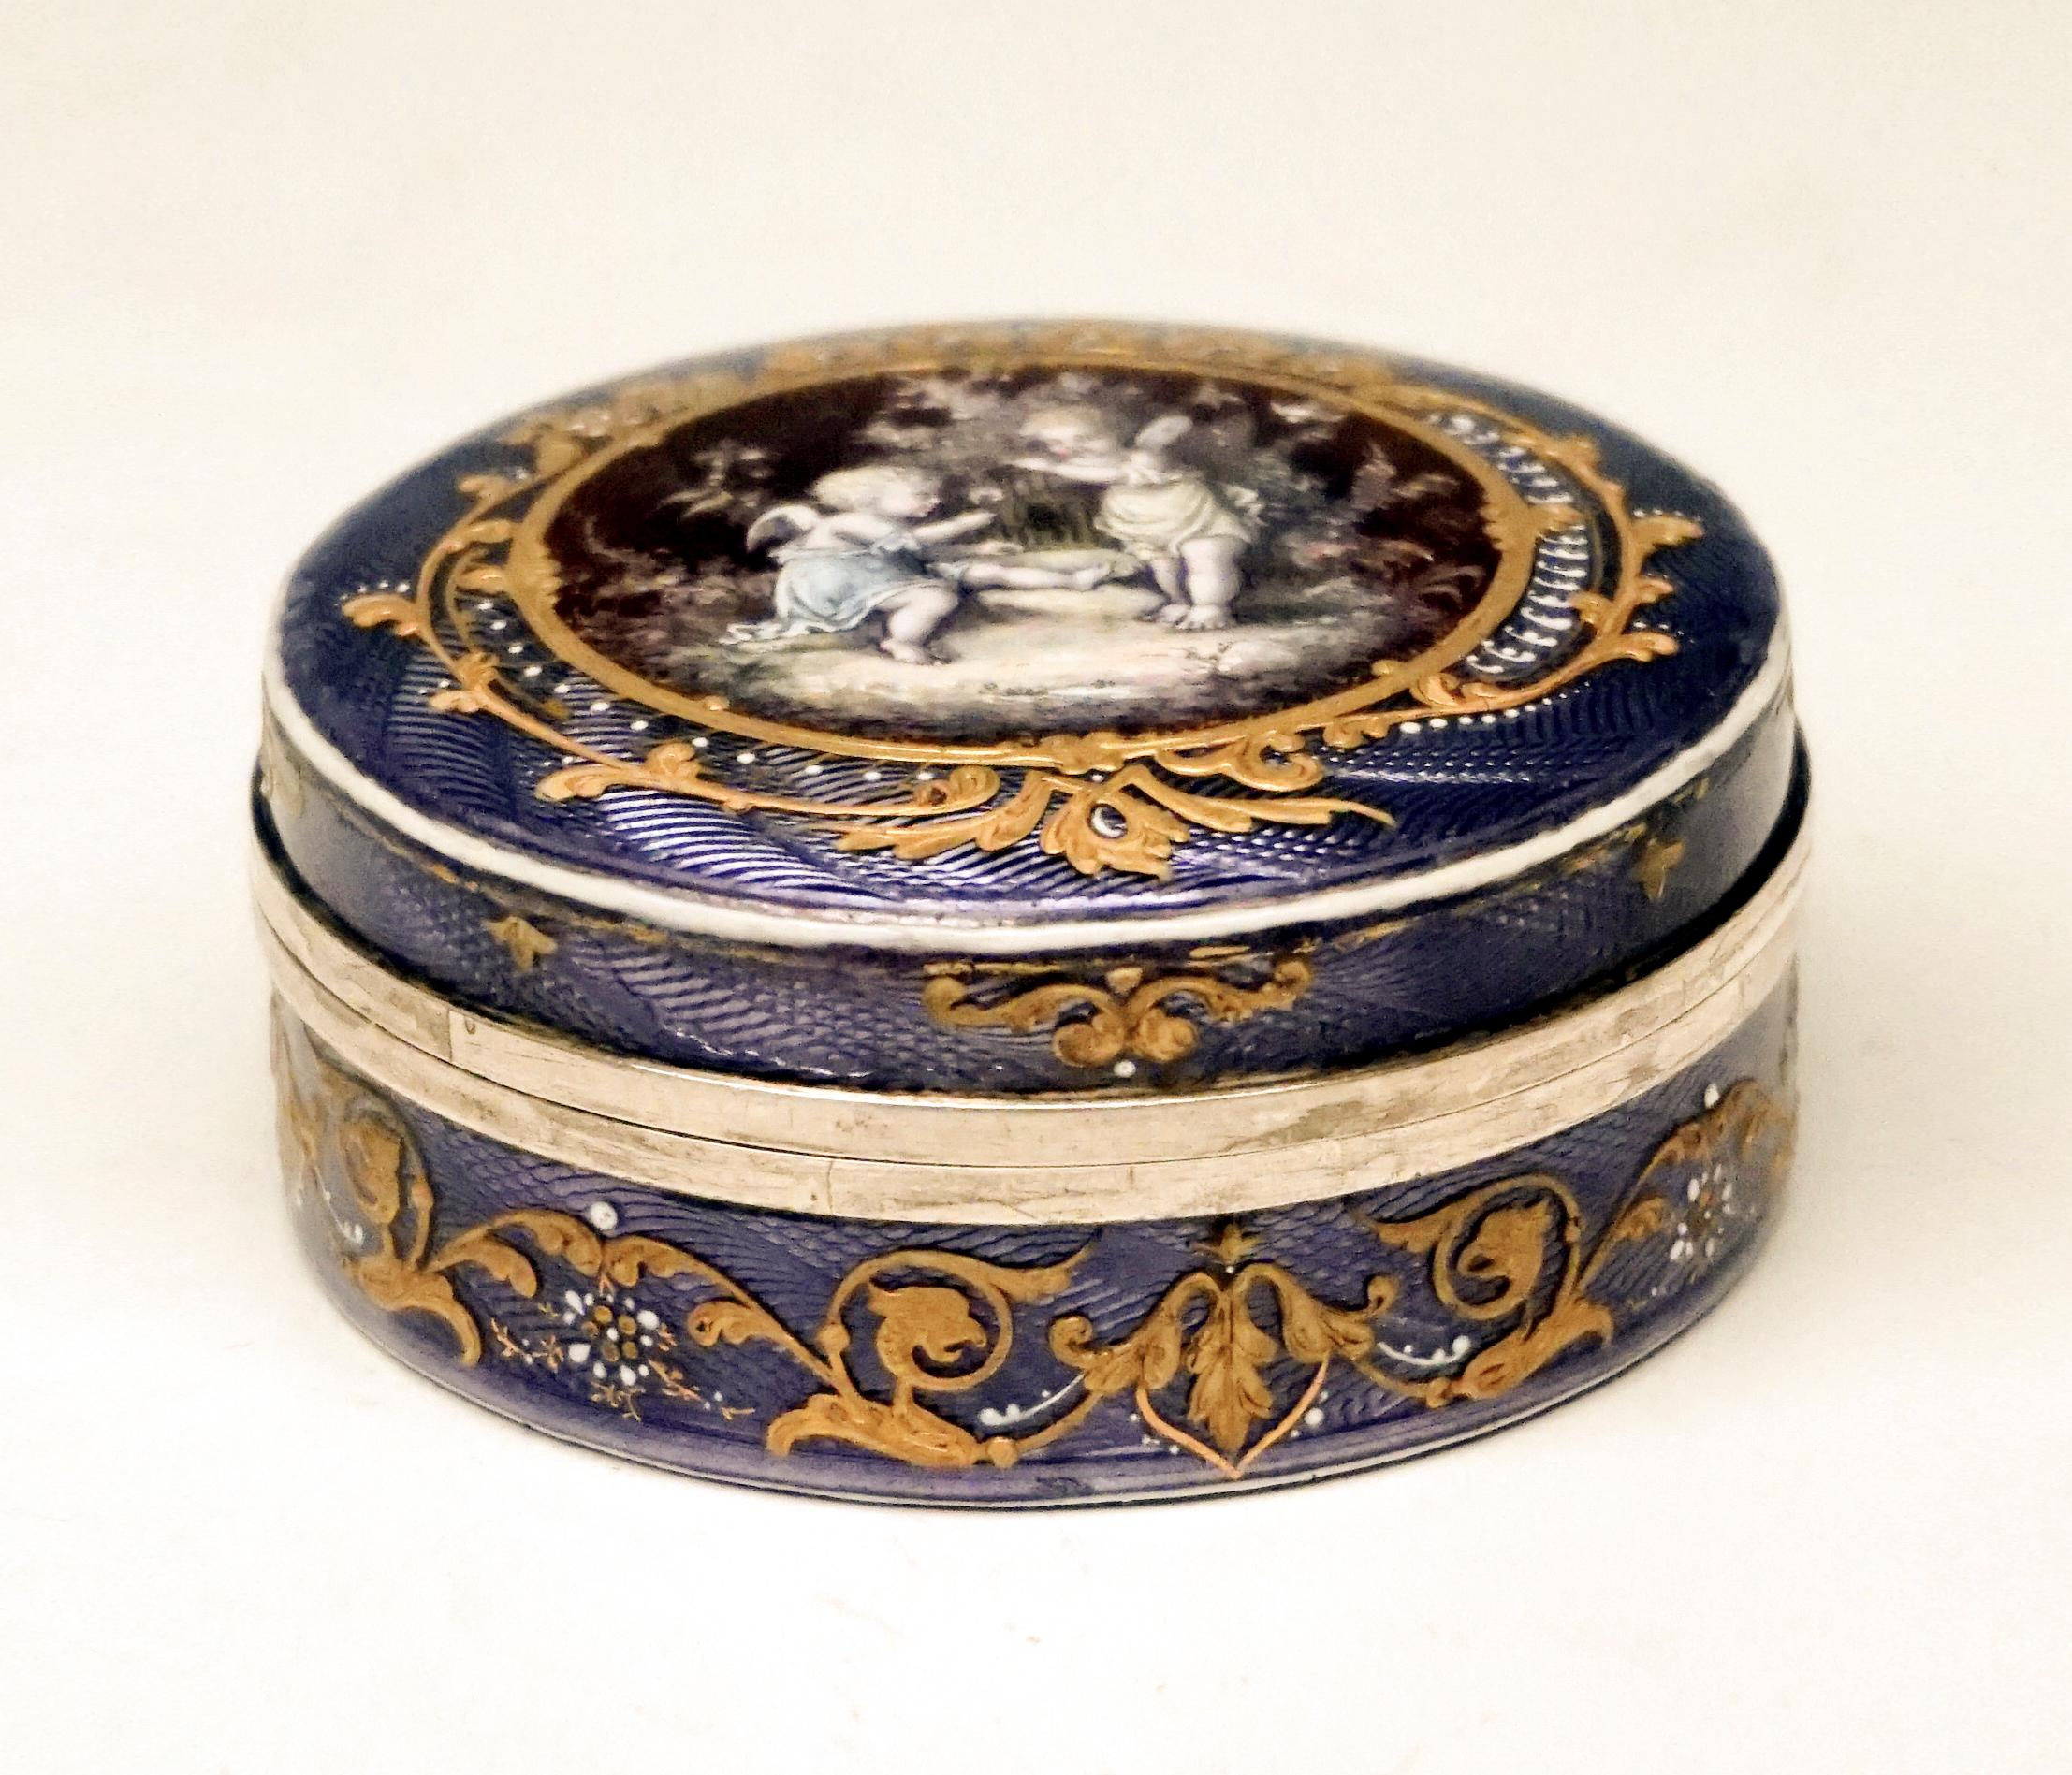 Exquisite enamel box from The Period circa 1900

Round silver box, completely guilloché and violet enamelled with a red medallion on the lid. Finest delicate enamel painting - cherub and elfin with bird cage in natural surrounding, as well as